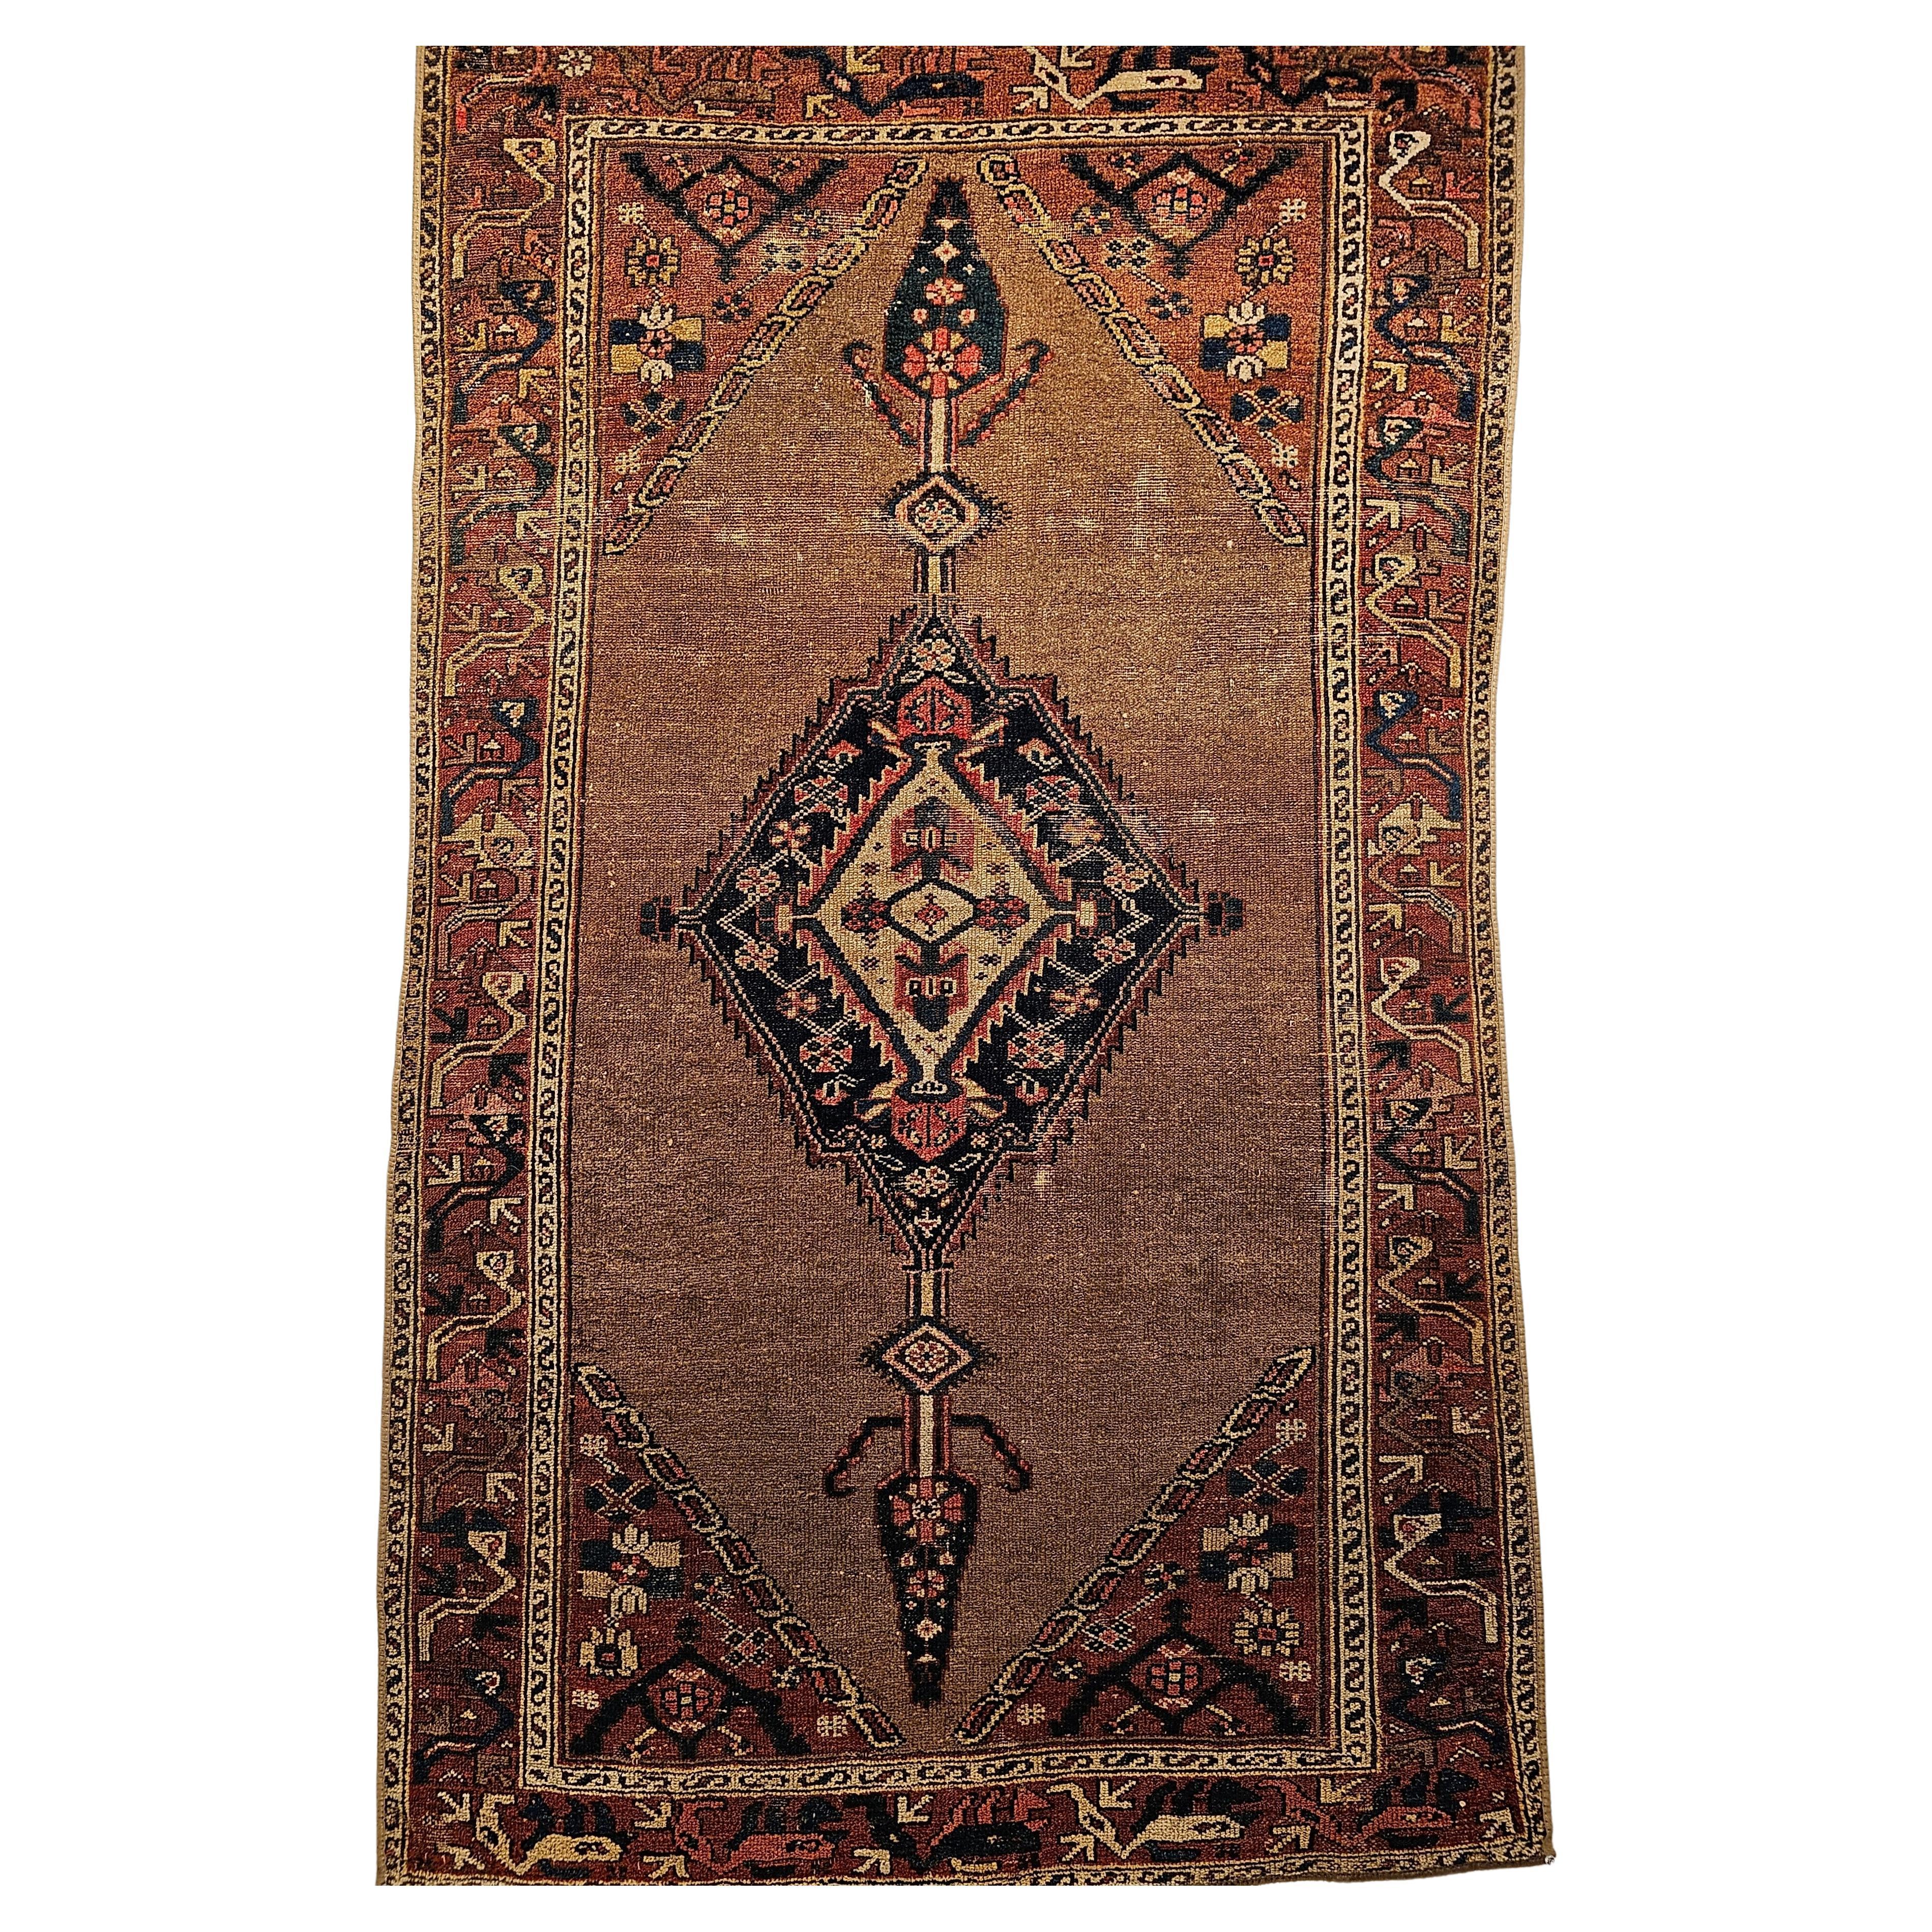 Vintage Persian Camelhair Malayer Area Rug in Camel, Navy, Ivory, Rust Red, Blue